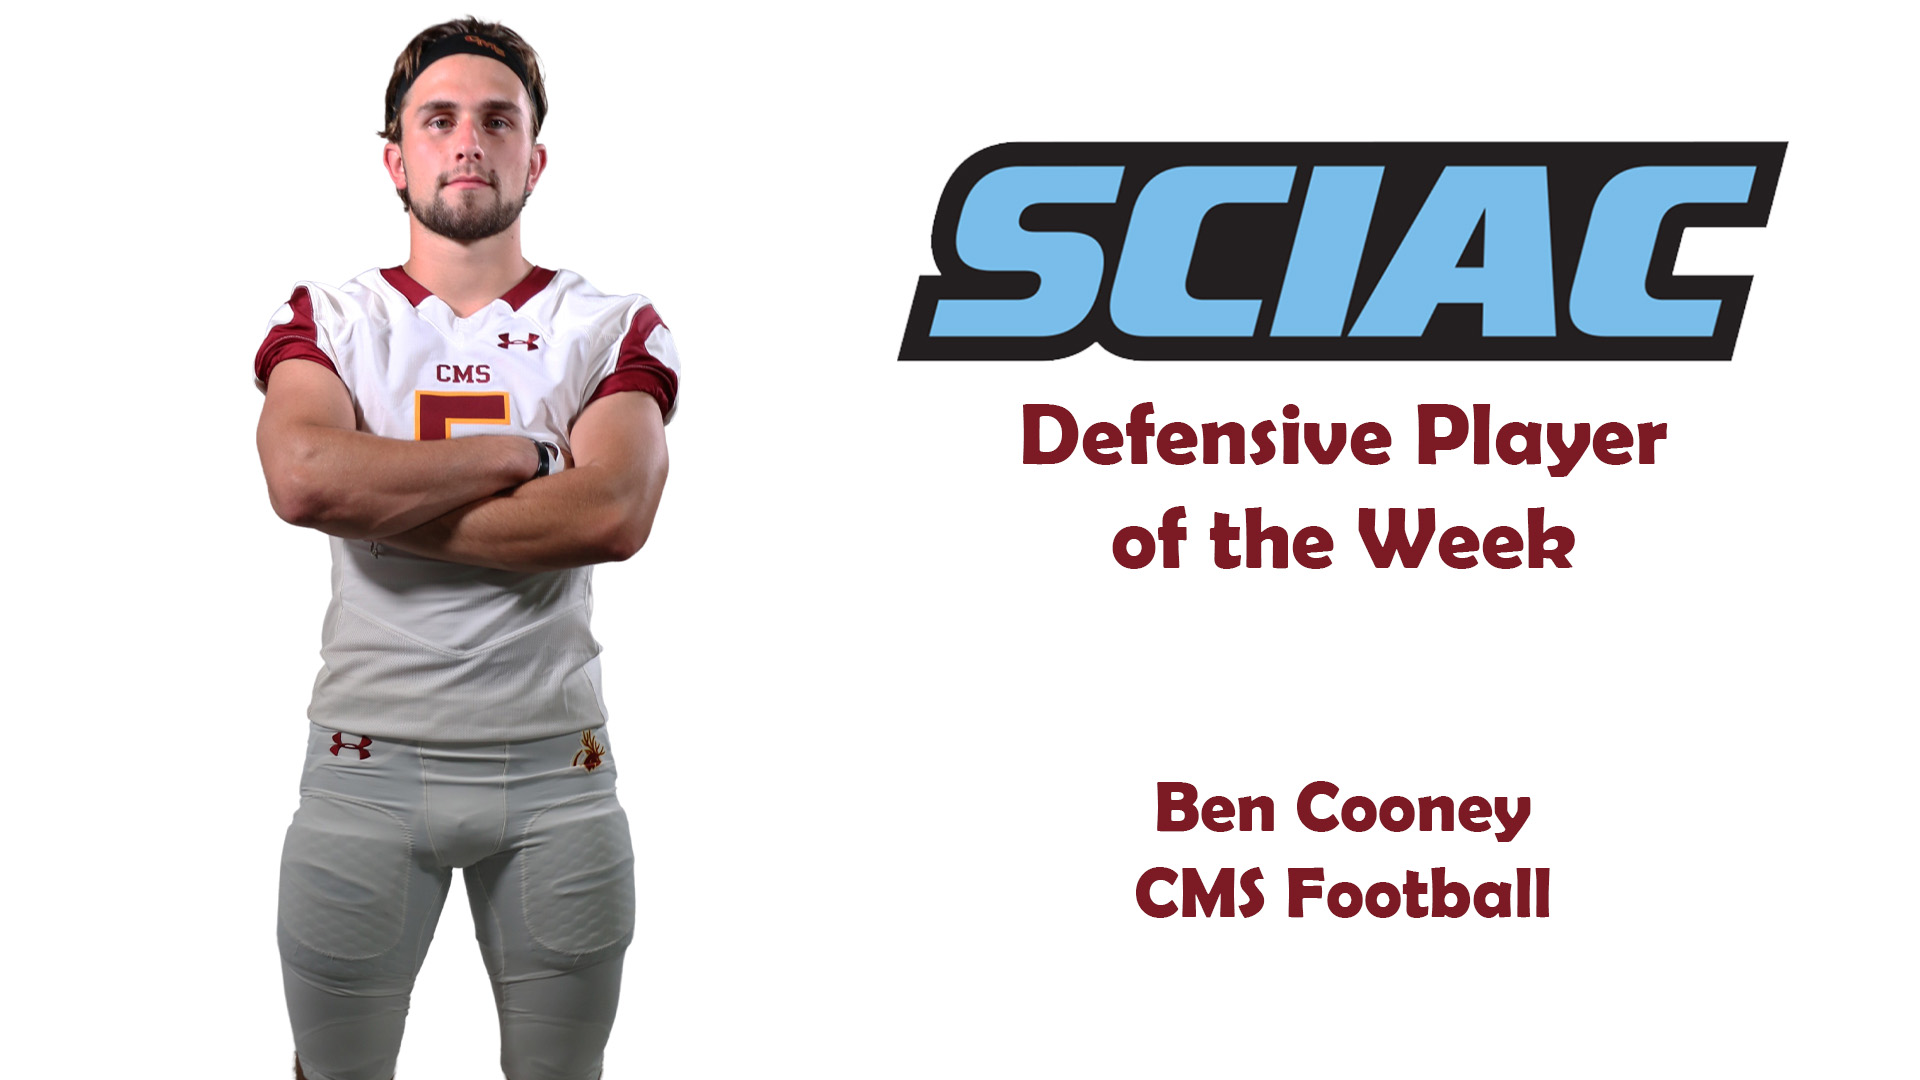 Ben Cooney posed photo with the SCIAC logo